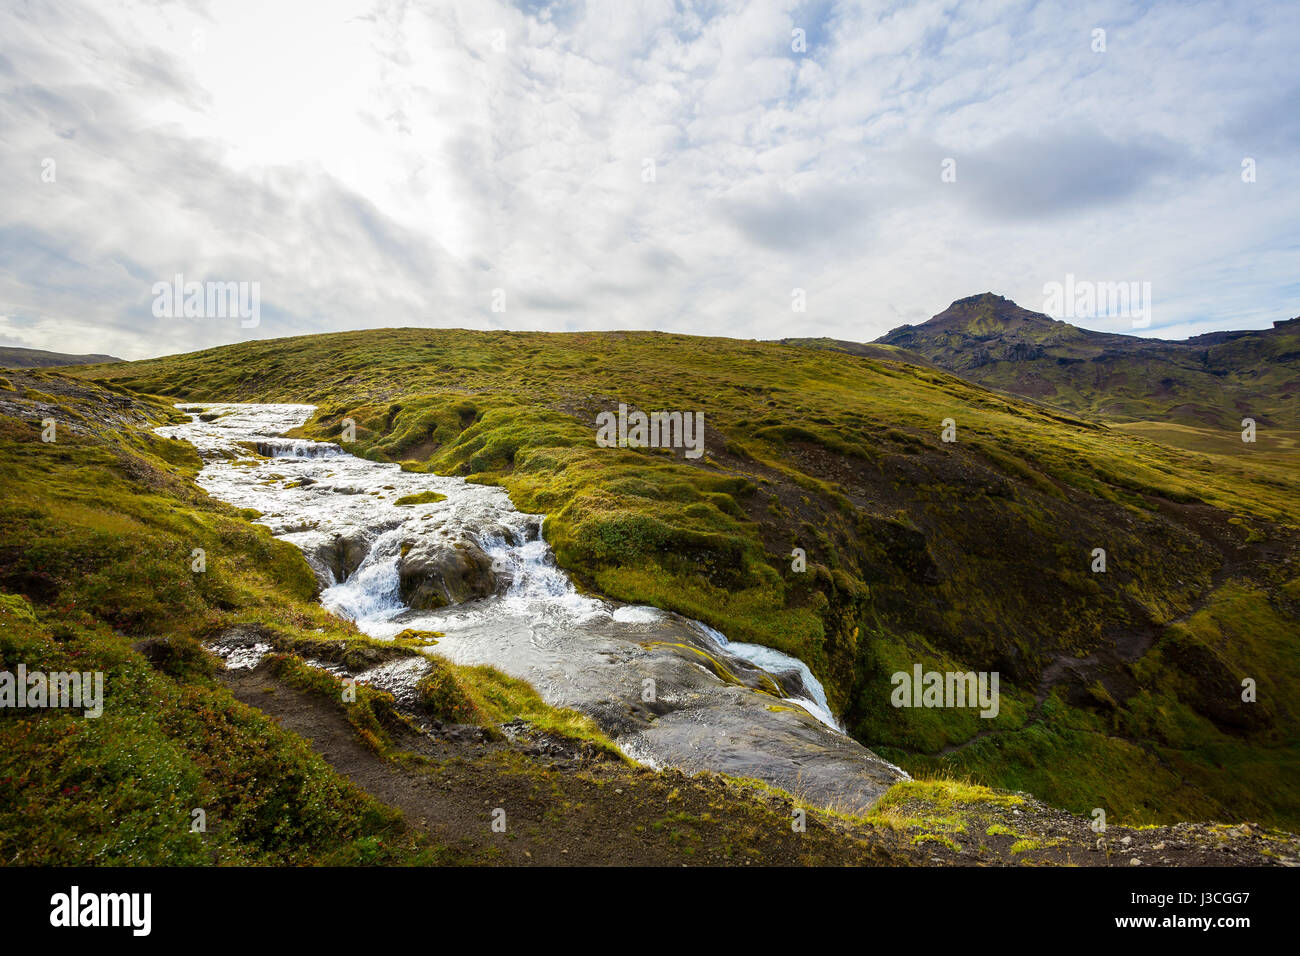 Cold water in Iceland. Waterfall in rocky mountains. Fresh and green grass. Beautiful mountain range in the backgrond. Stock Photo